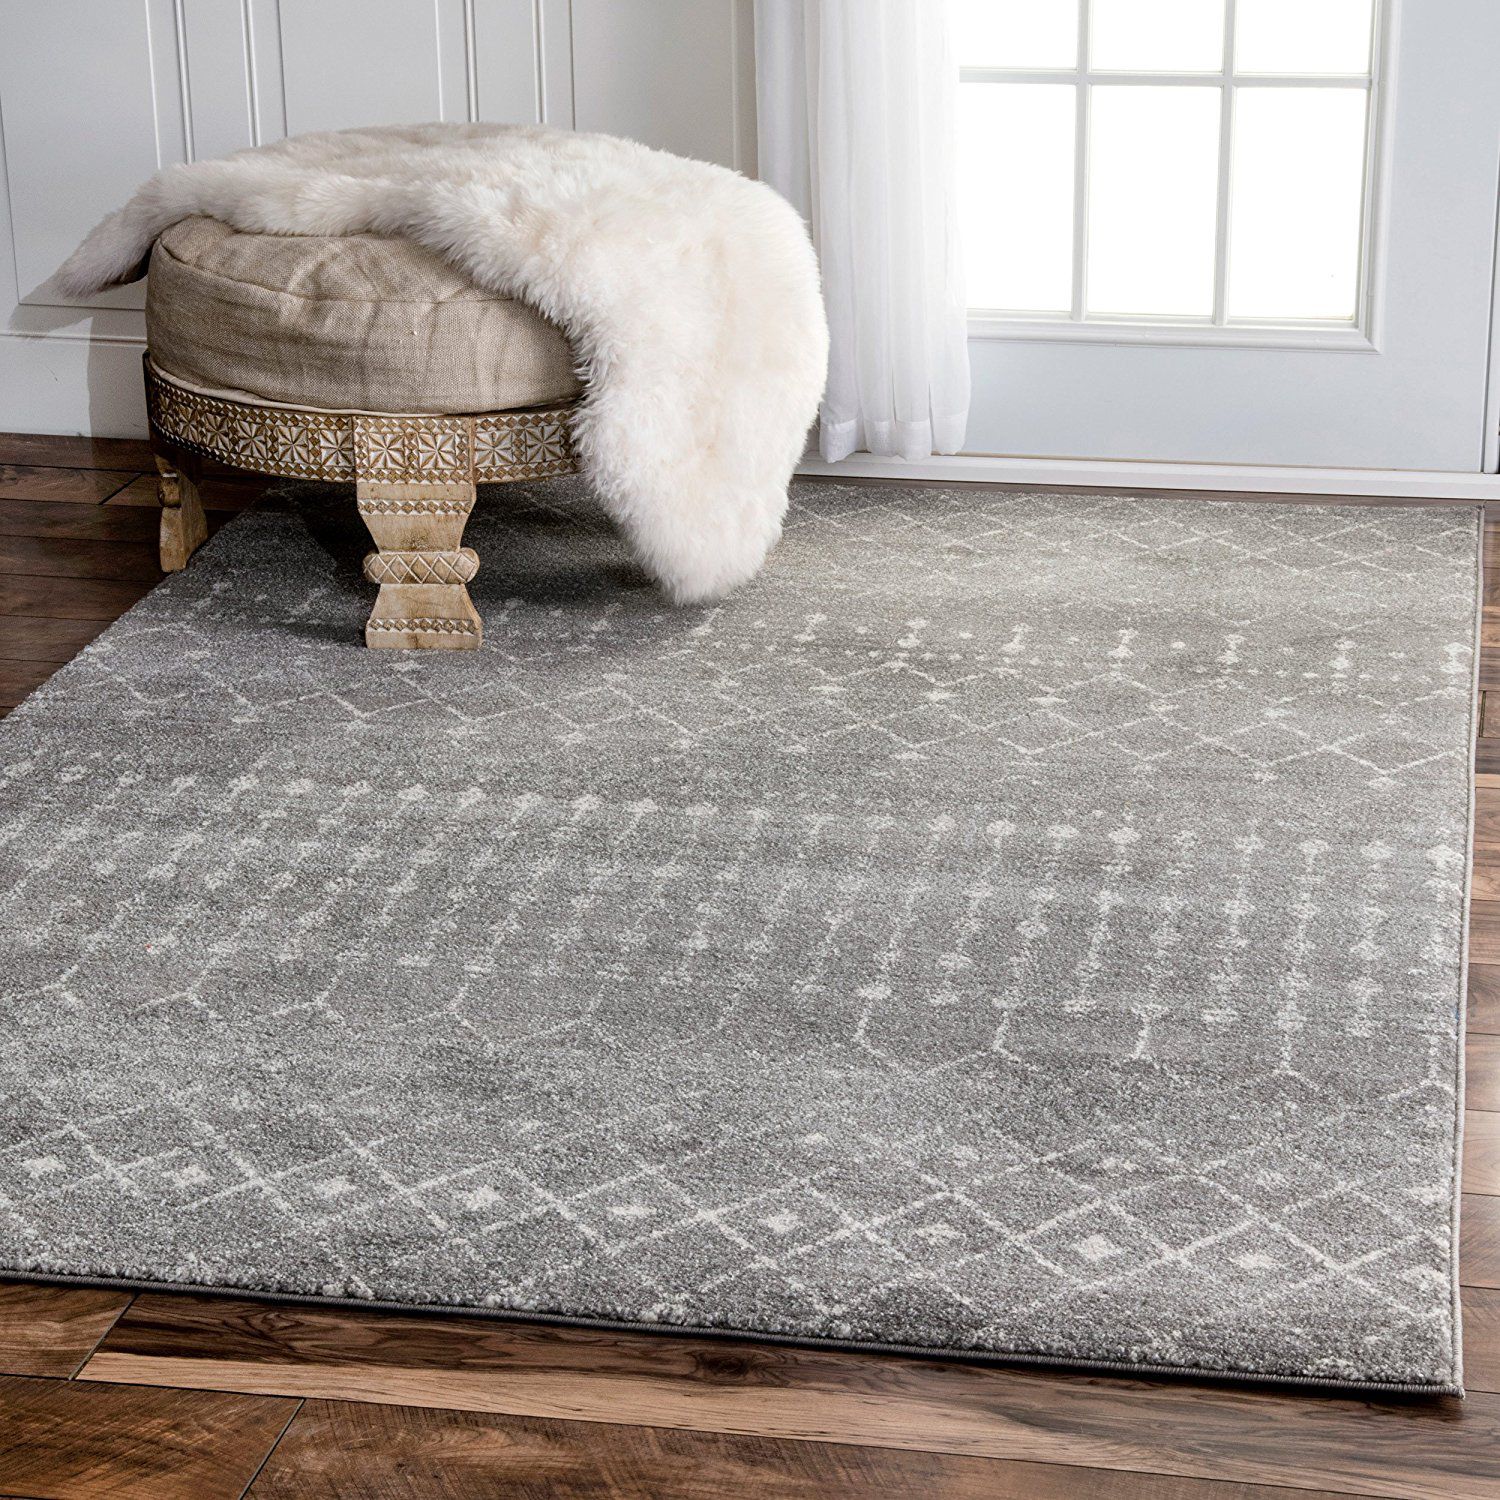 The 7 Best Area Rugs to Buy in 2018